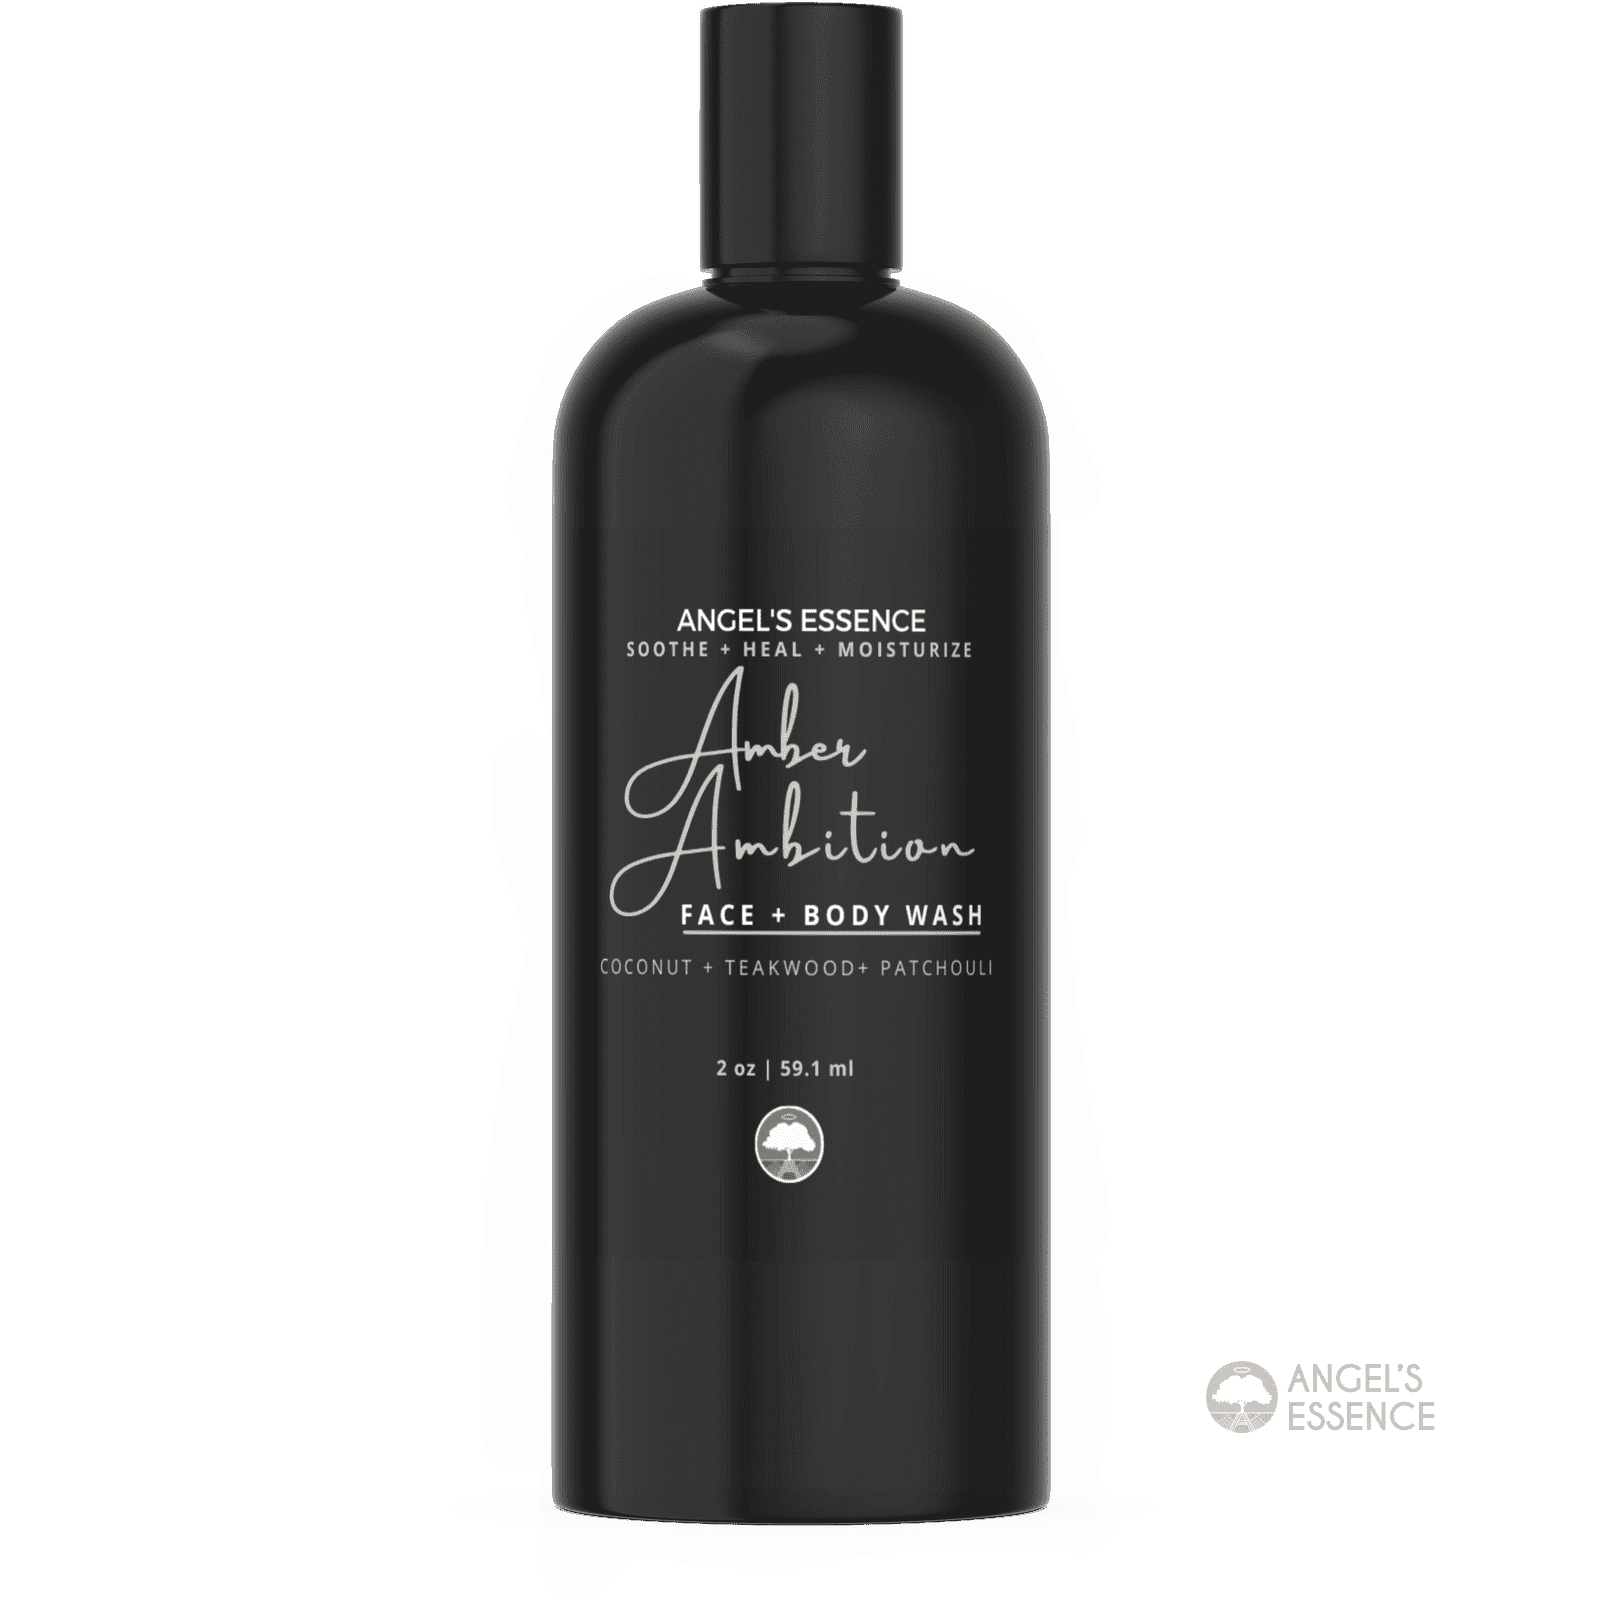 Amber Ambition Face & Body Wash